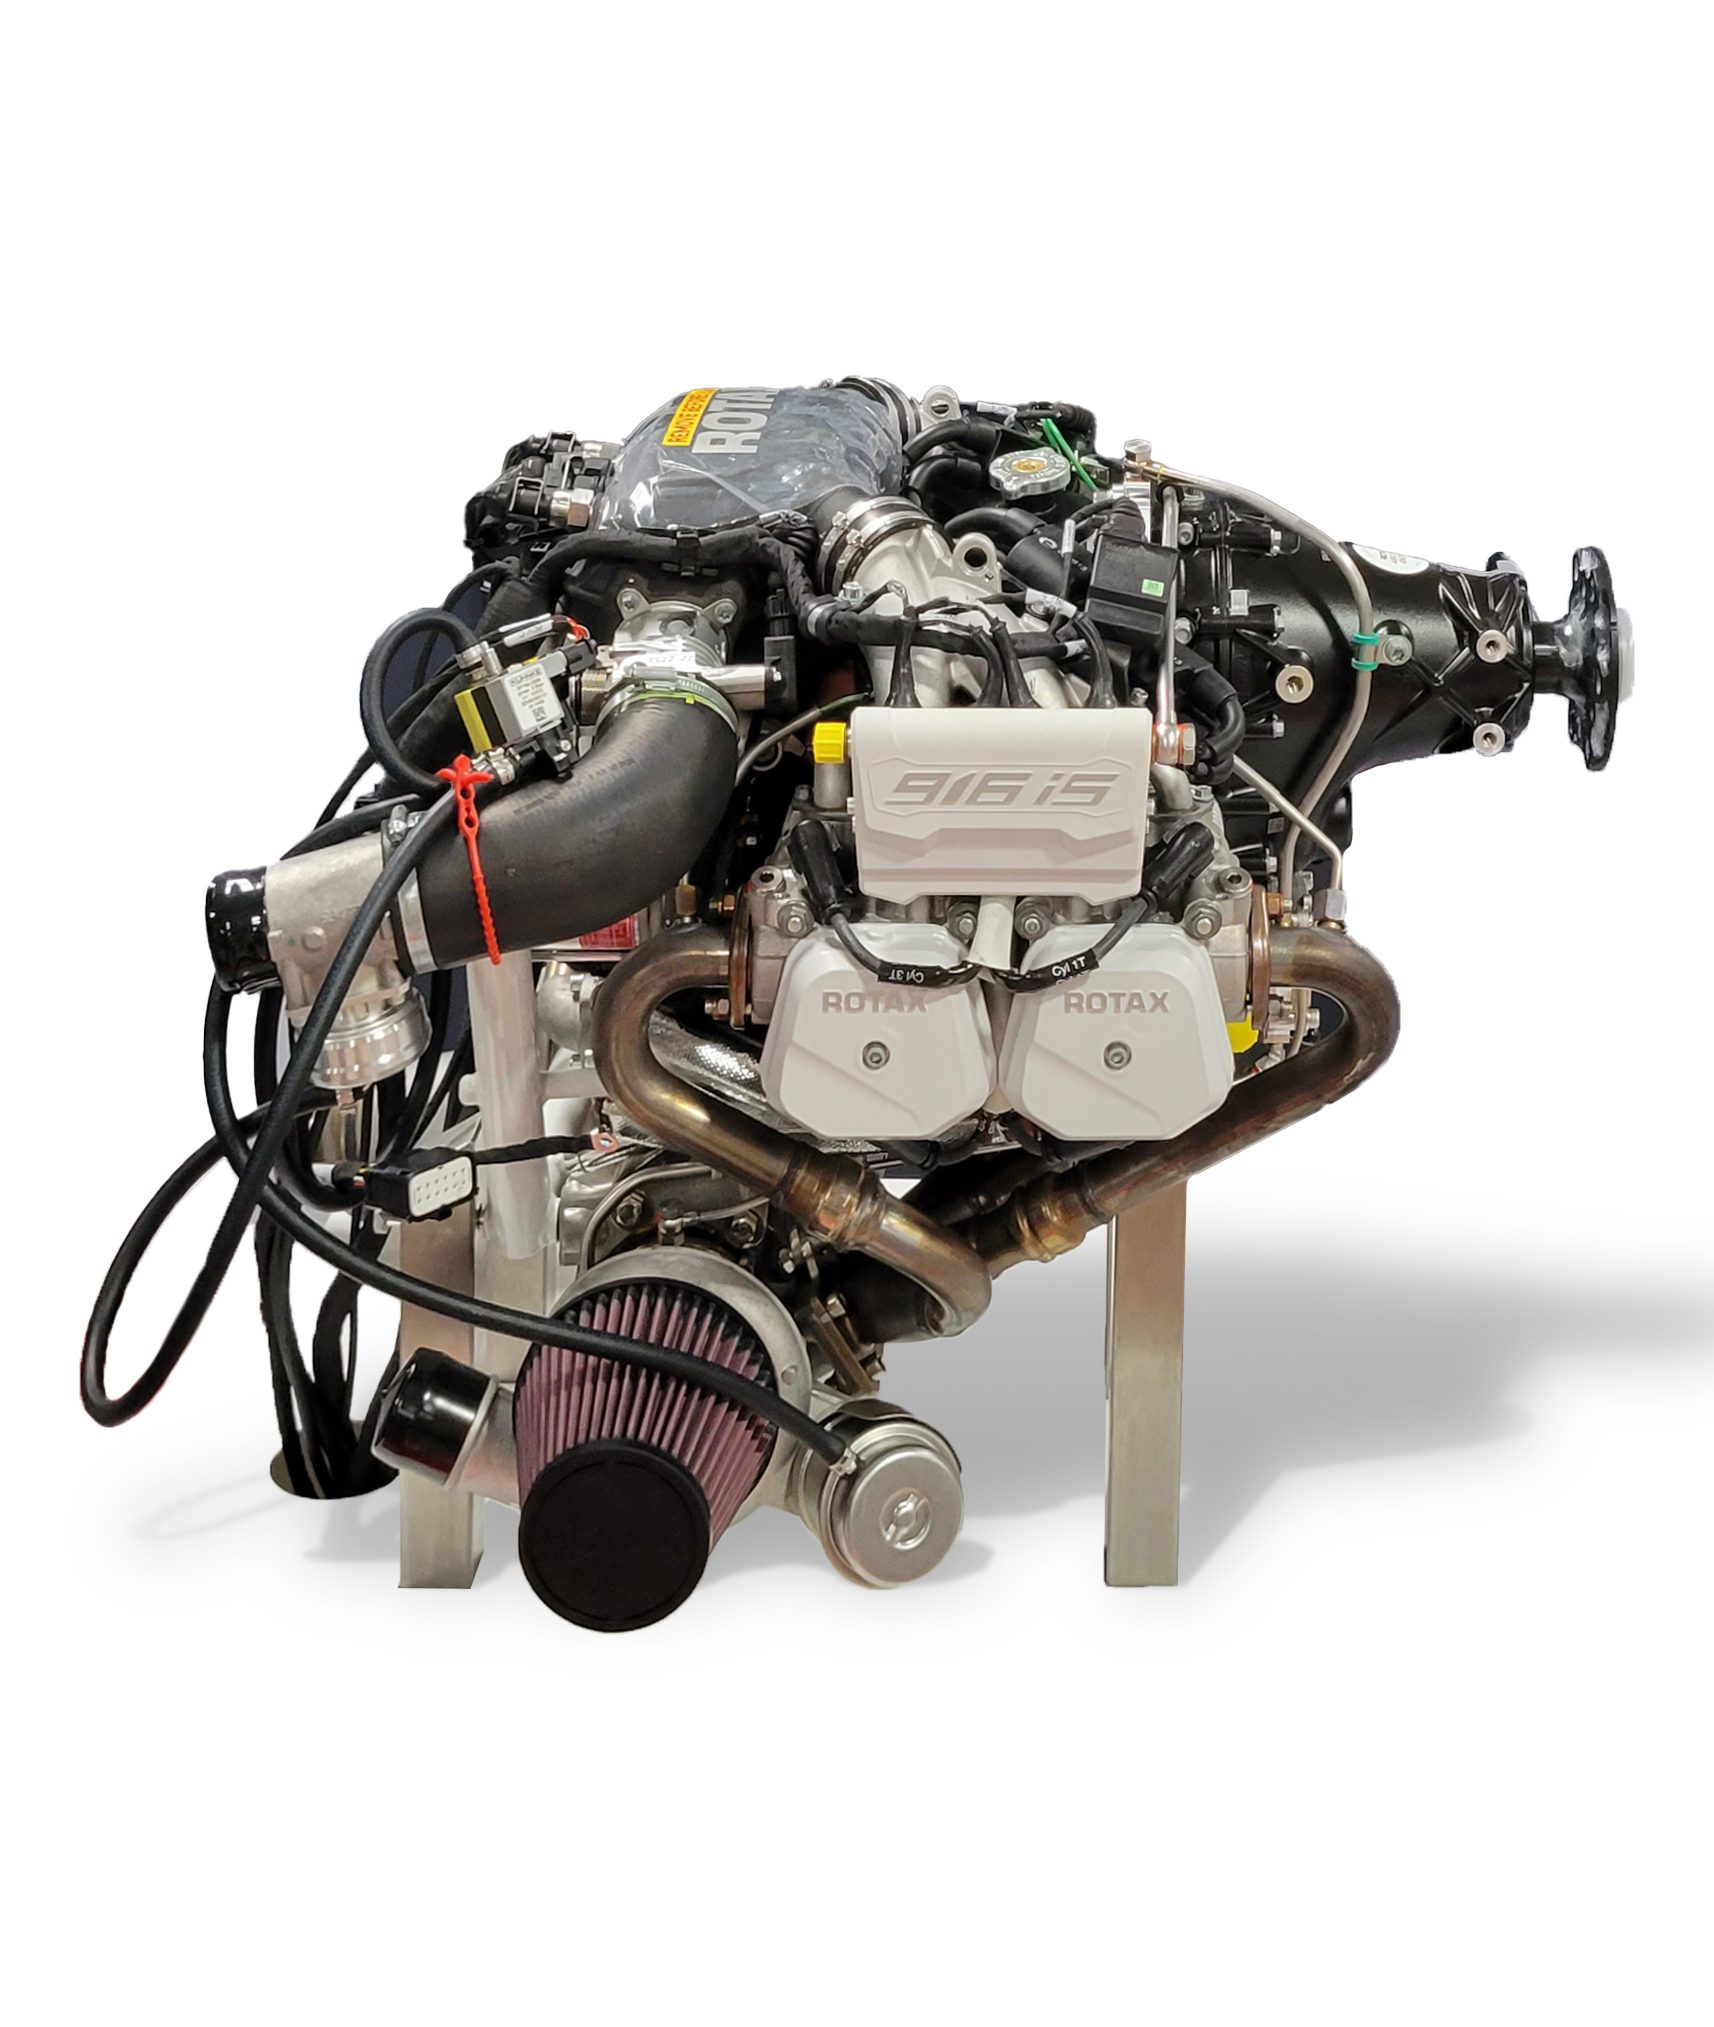 Rotax Engines for Sale  Force Motorcycles Blog